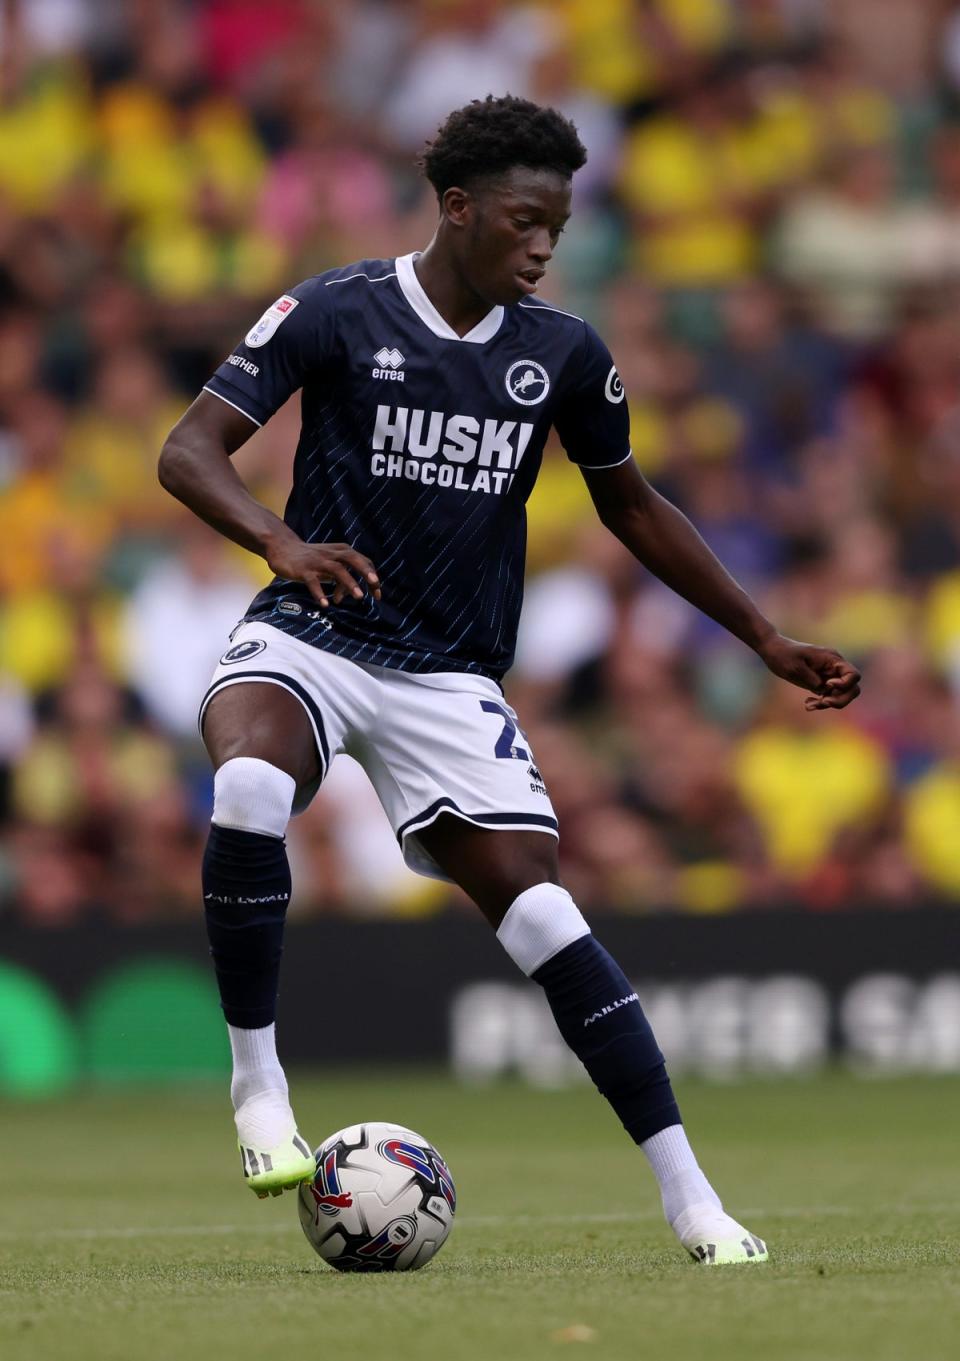 Romain Esse playing for Millwall (Getty Images)